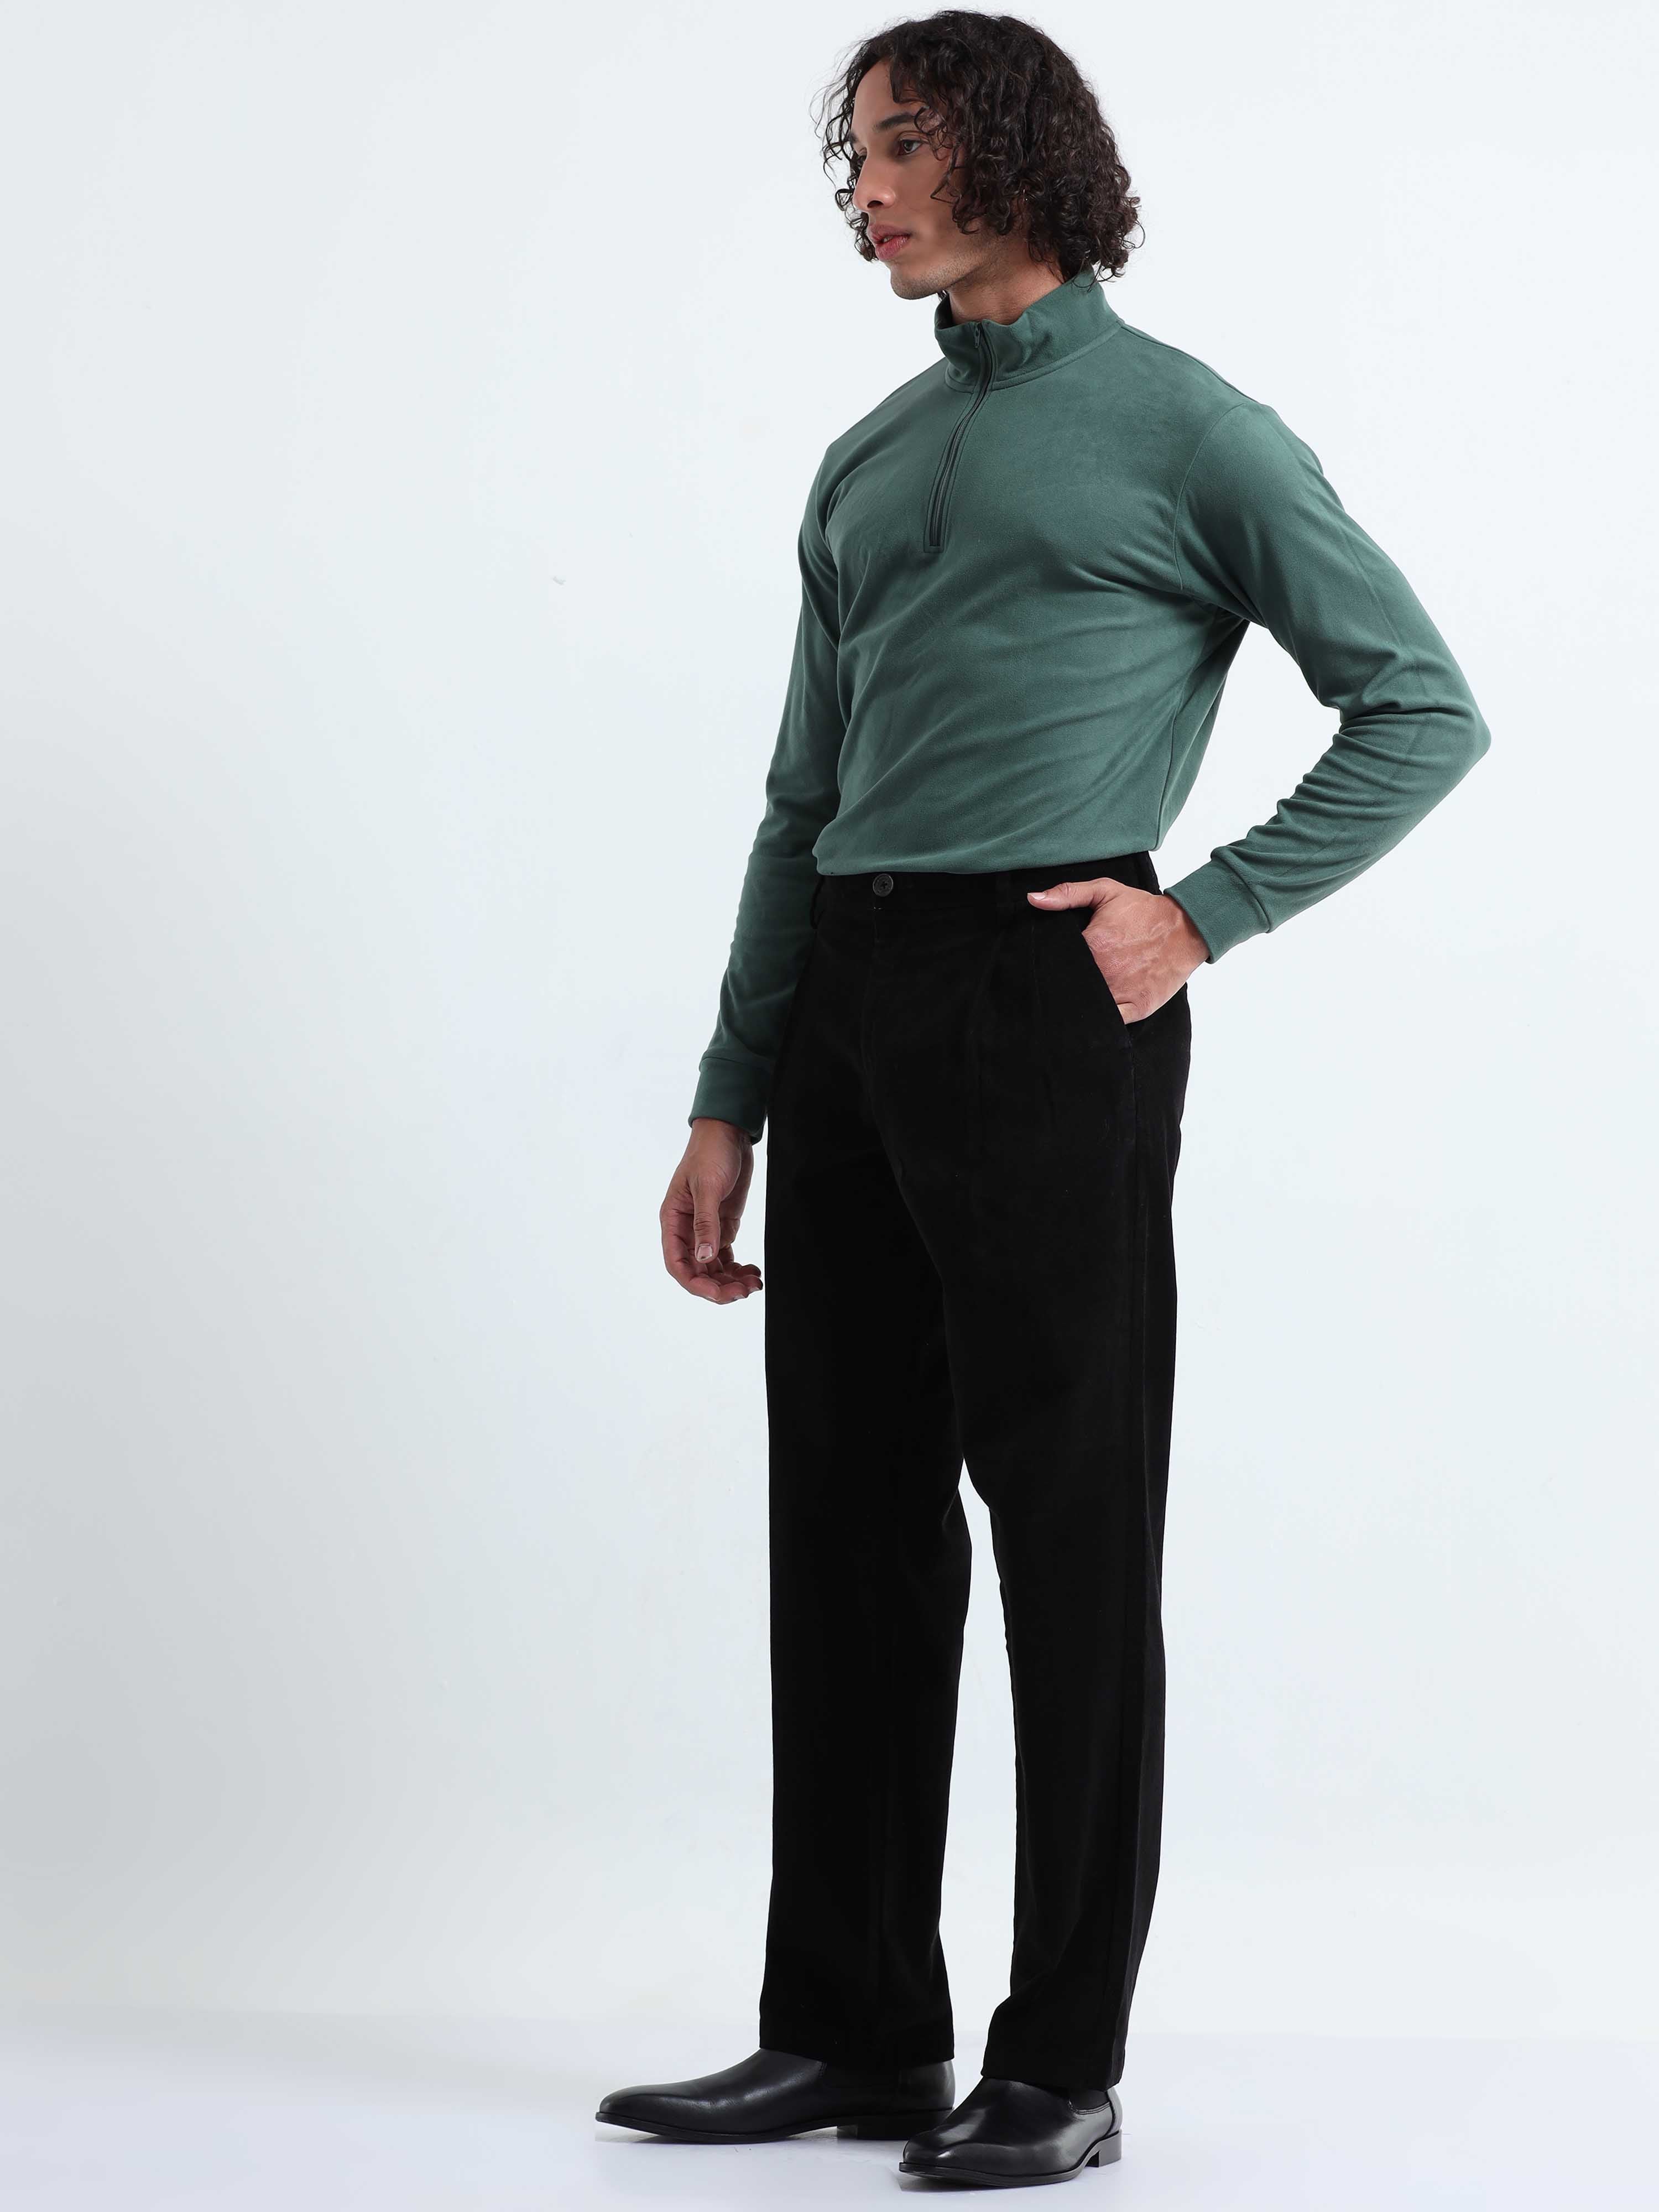 Relaxed Fit Mens Black Corduroy Pants